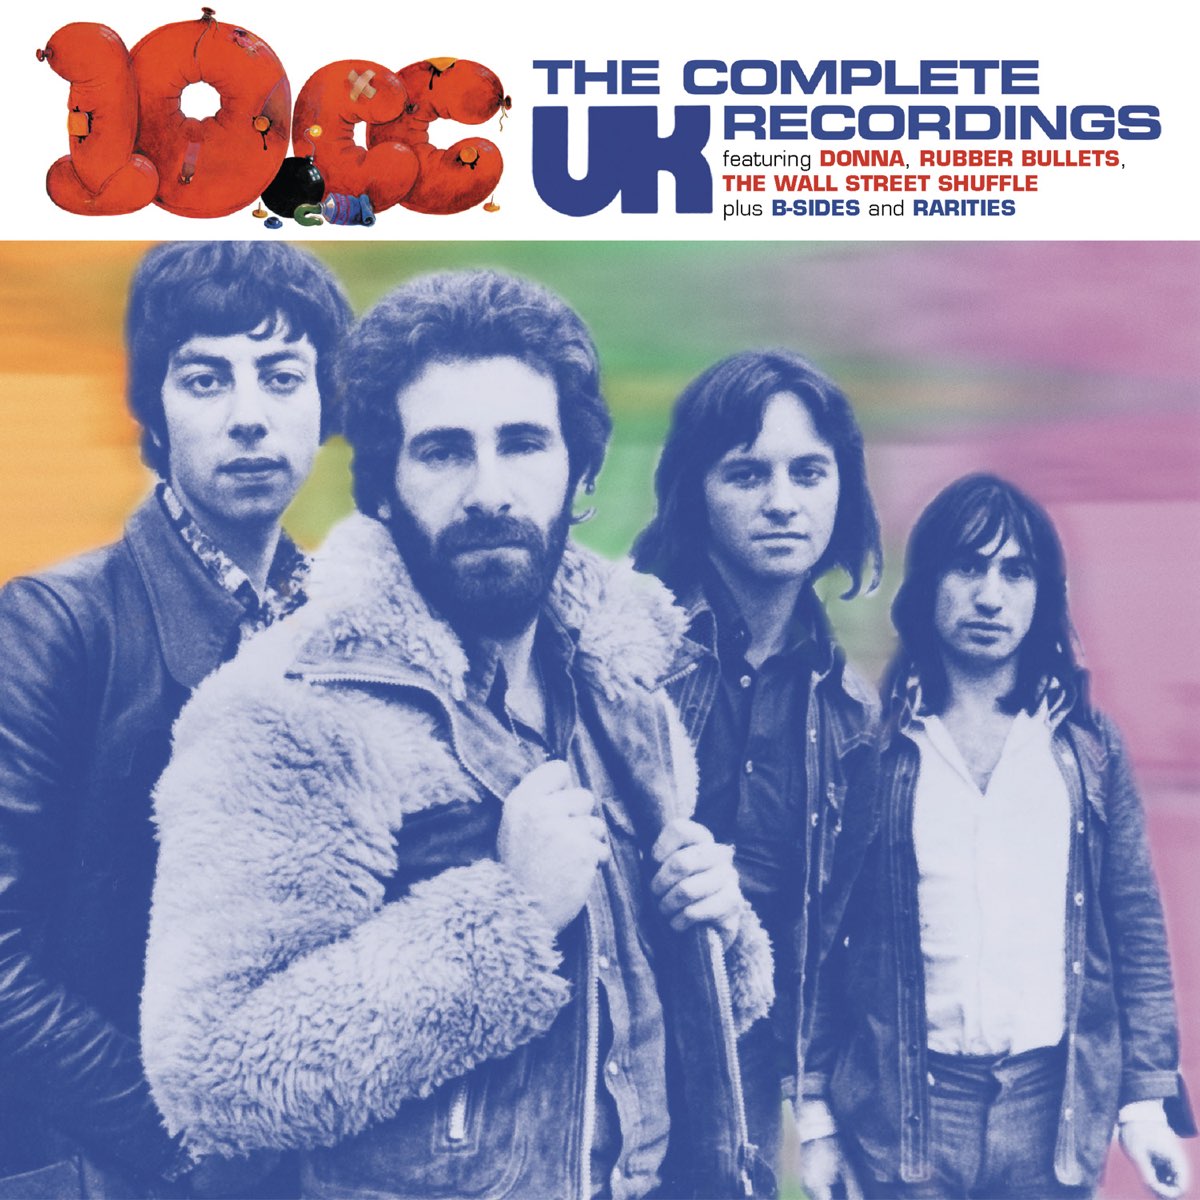 The Complete UK Recordings by 10cc on Apple Music